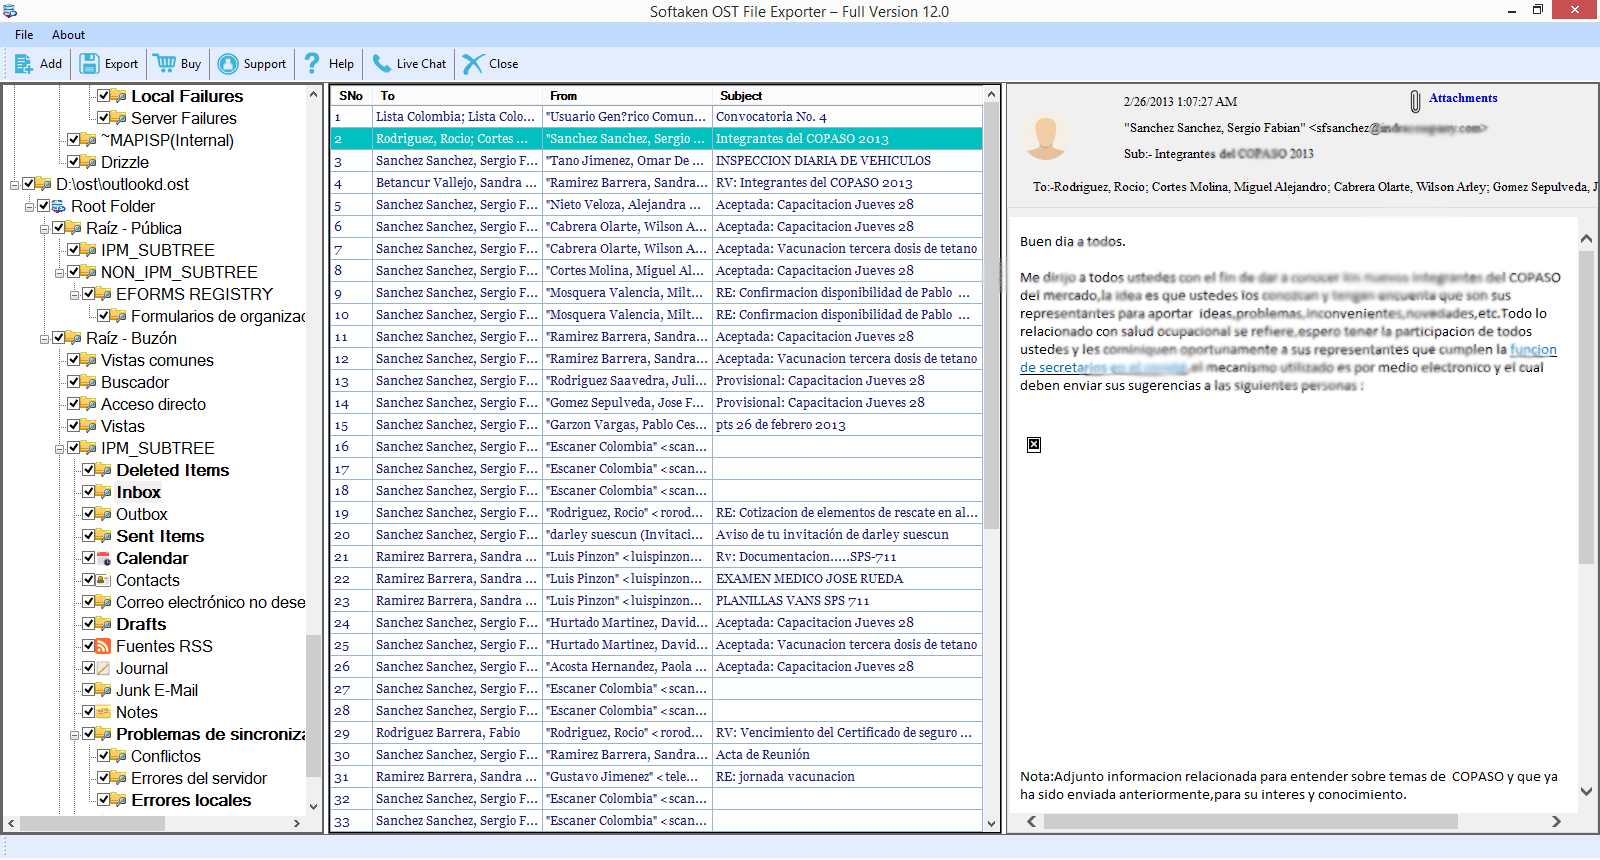 Preview all Recovered OST Emails with Attachments in preview panel